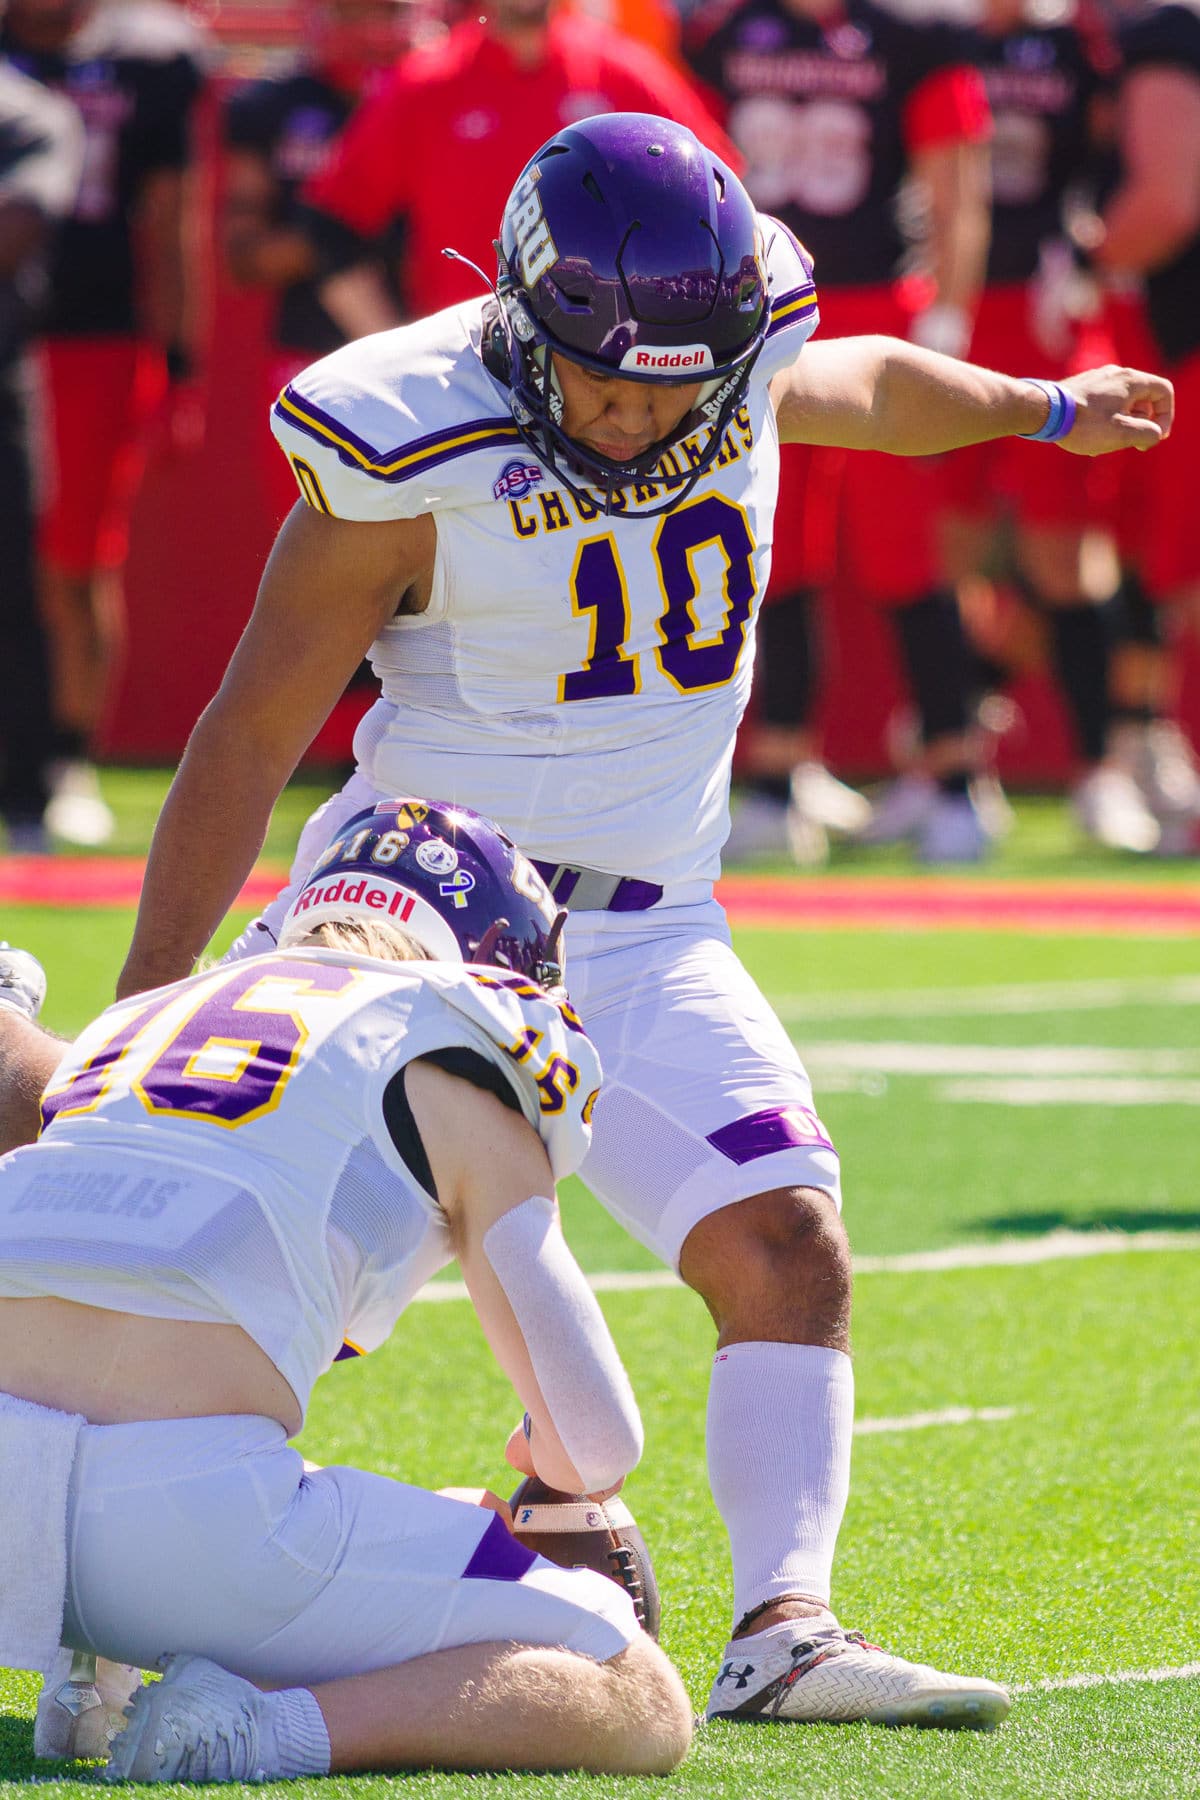 20211023-UMHB-Vfb-at-Sul-Ross-220